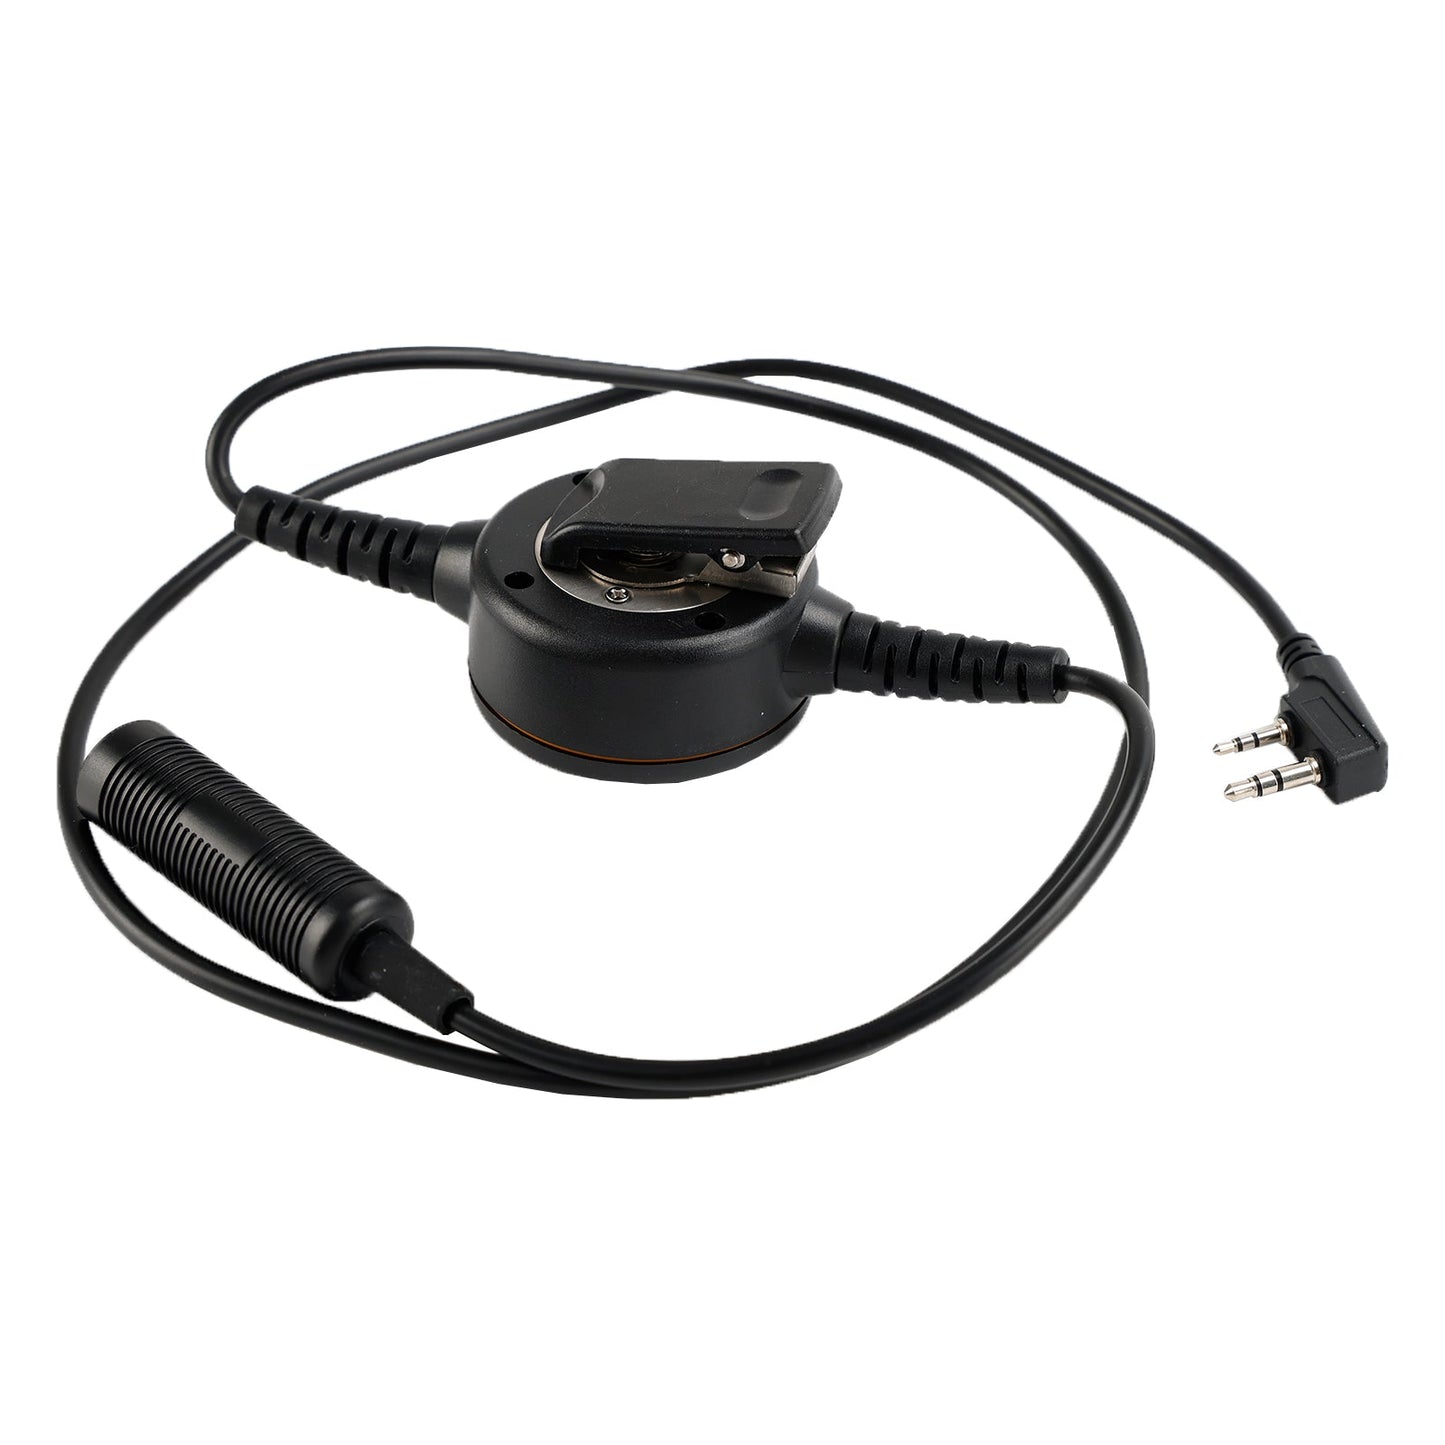 H60 Sound Pickup Noise Reduction Headset 6-Pin PTT For TH-D7 TH-F6 TH-K2 TH-21